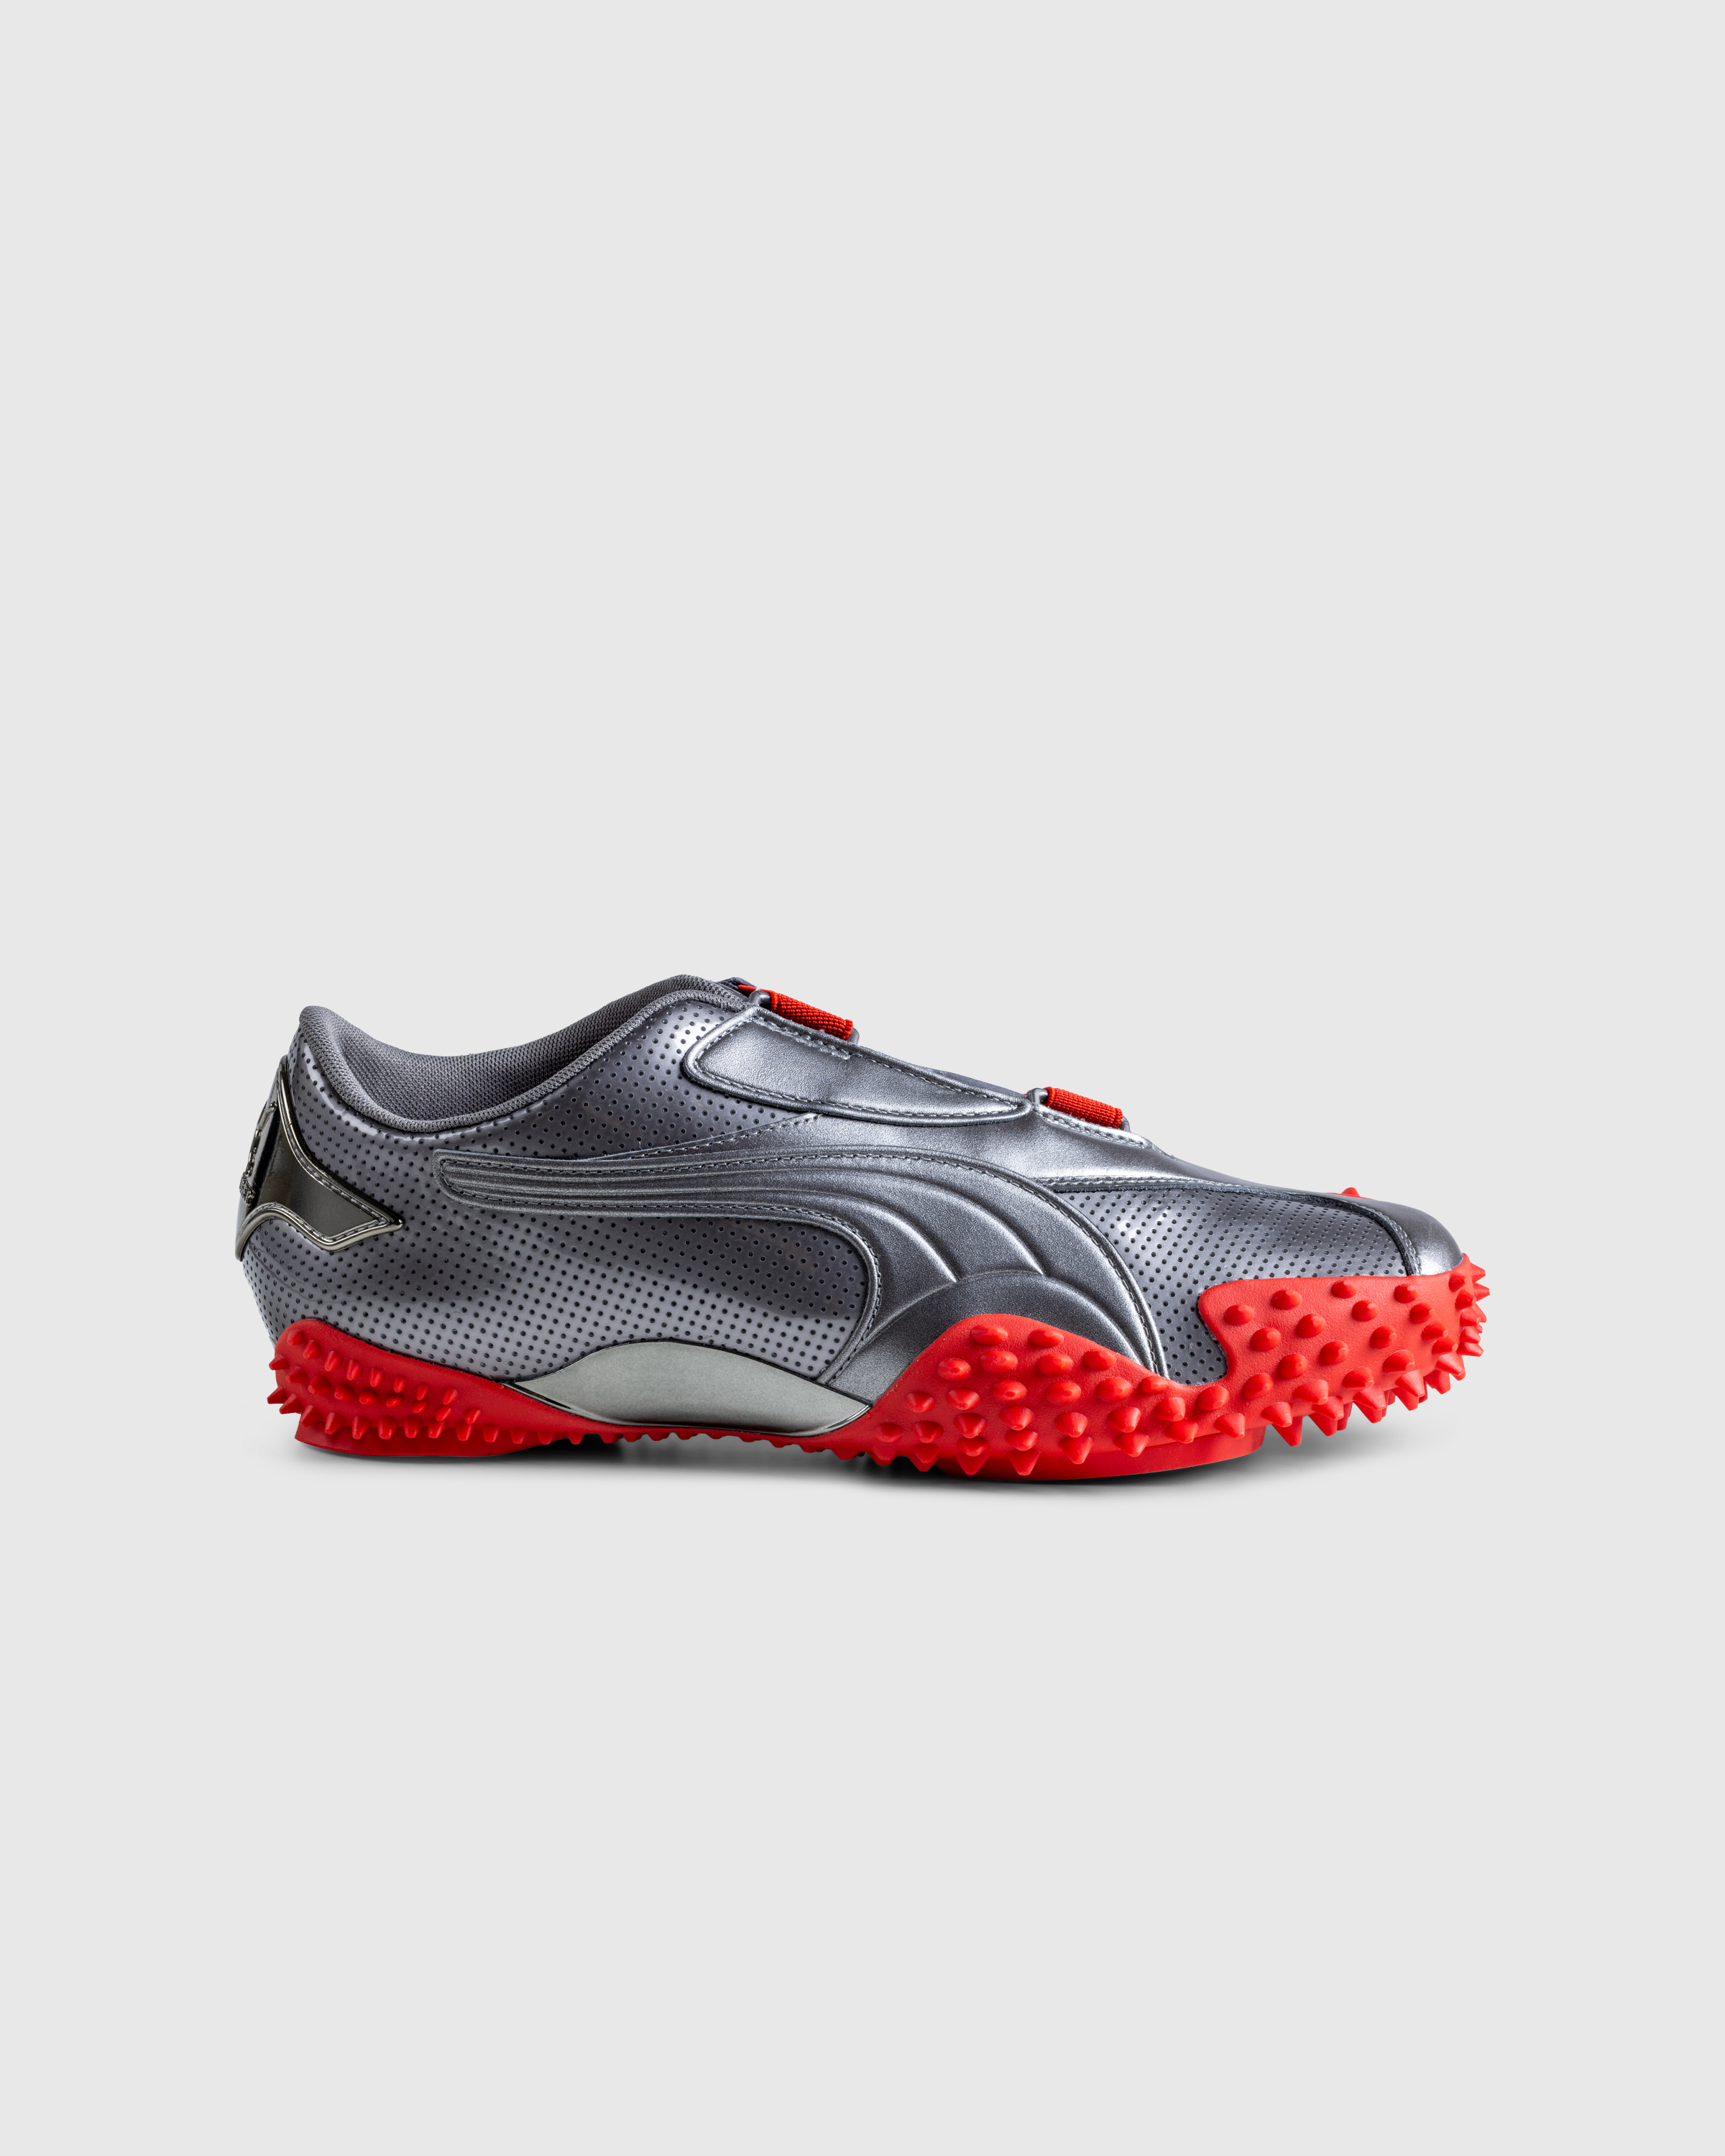 Puma x Ottolinger – Mostro Lo Silver / Red - Low Top Sneakers - Silver - Image 1